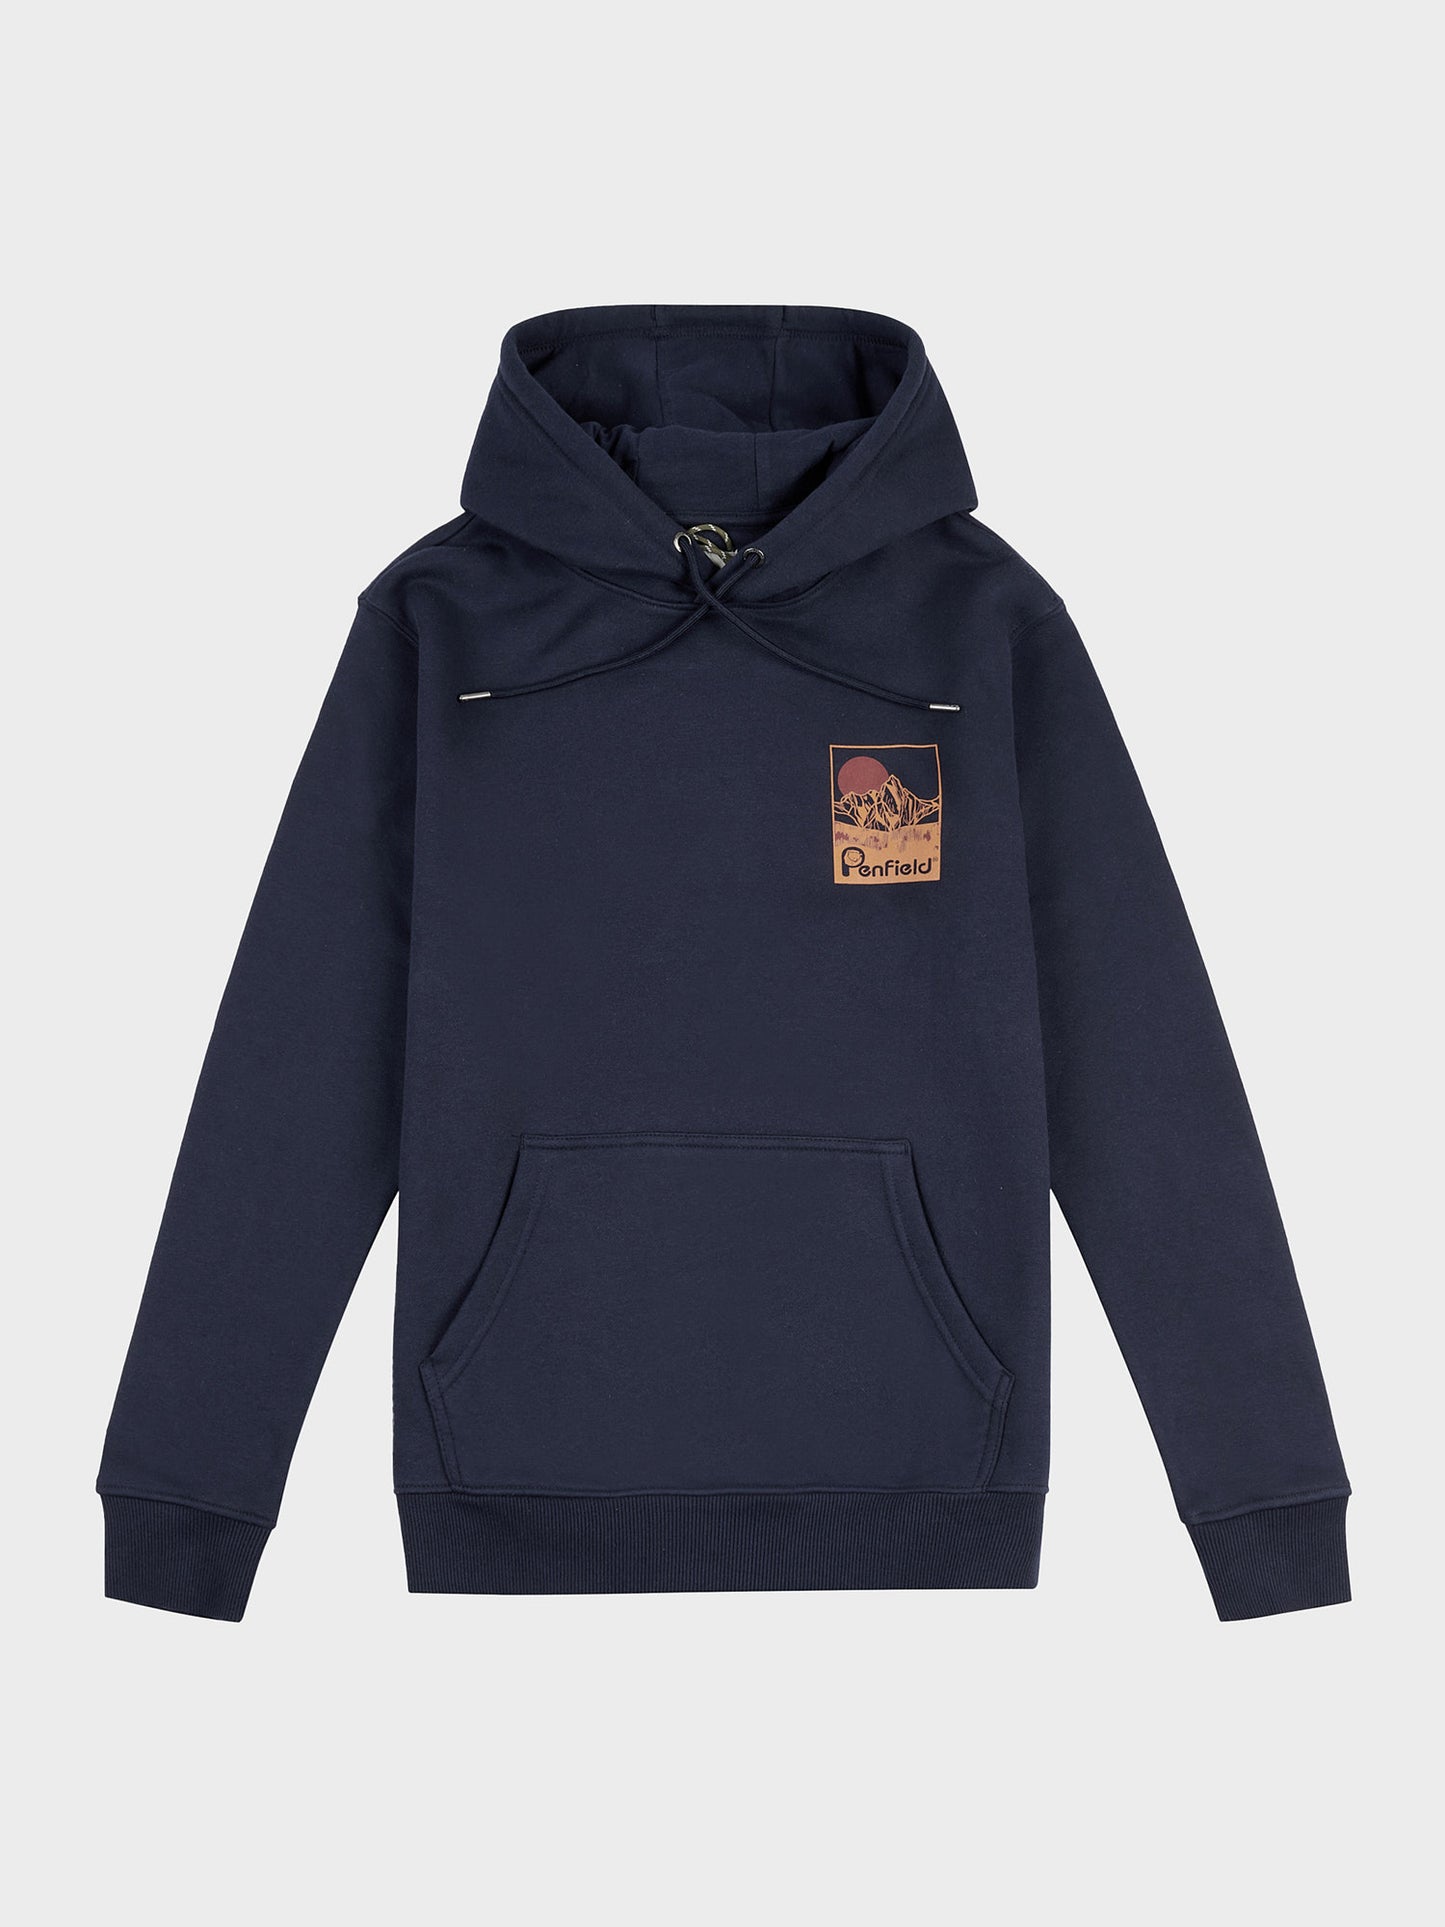 Washed Mountain Graphic Hoodie in Navy Blue